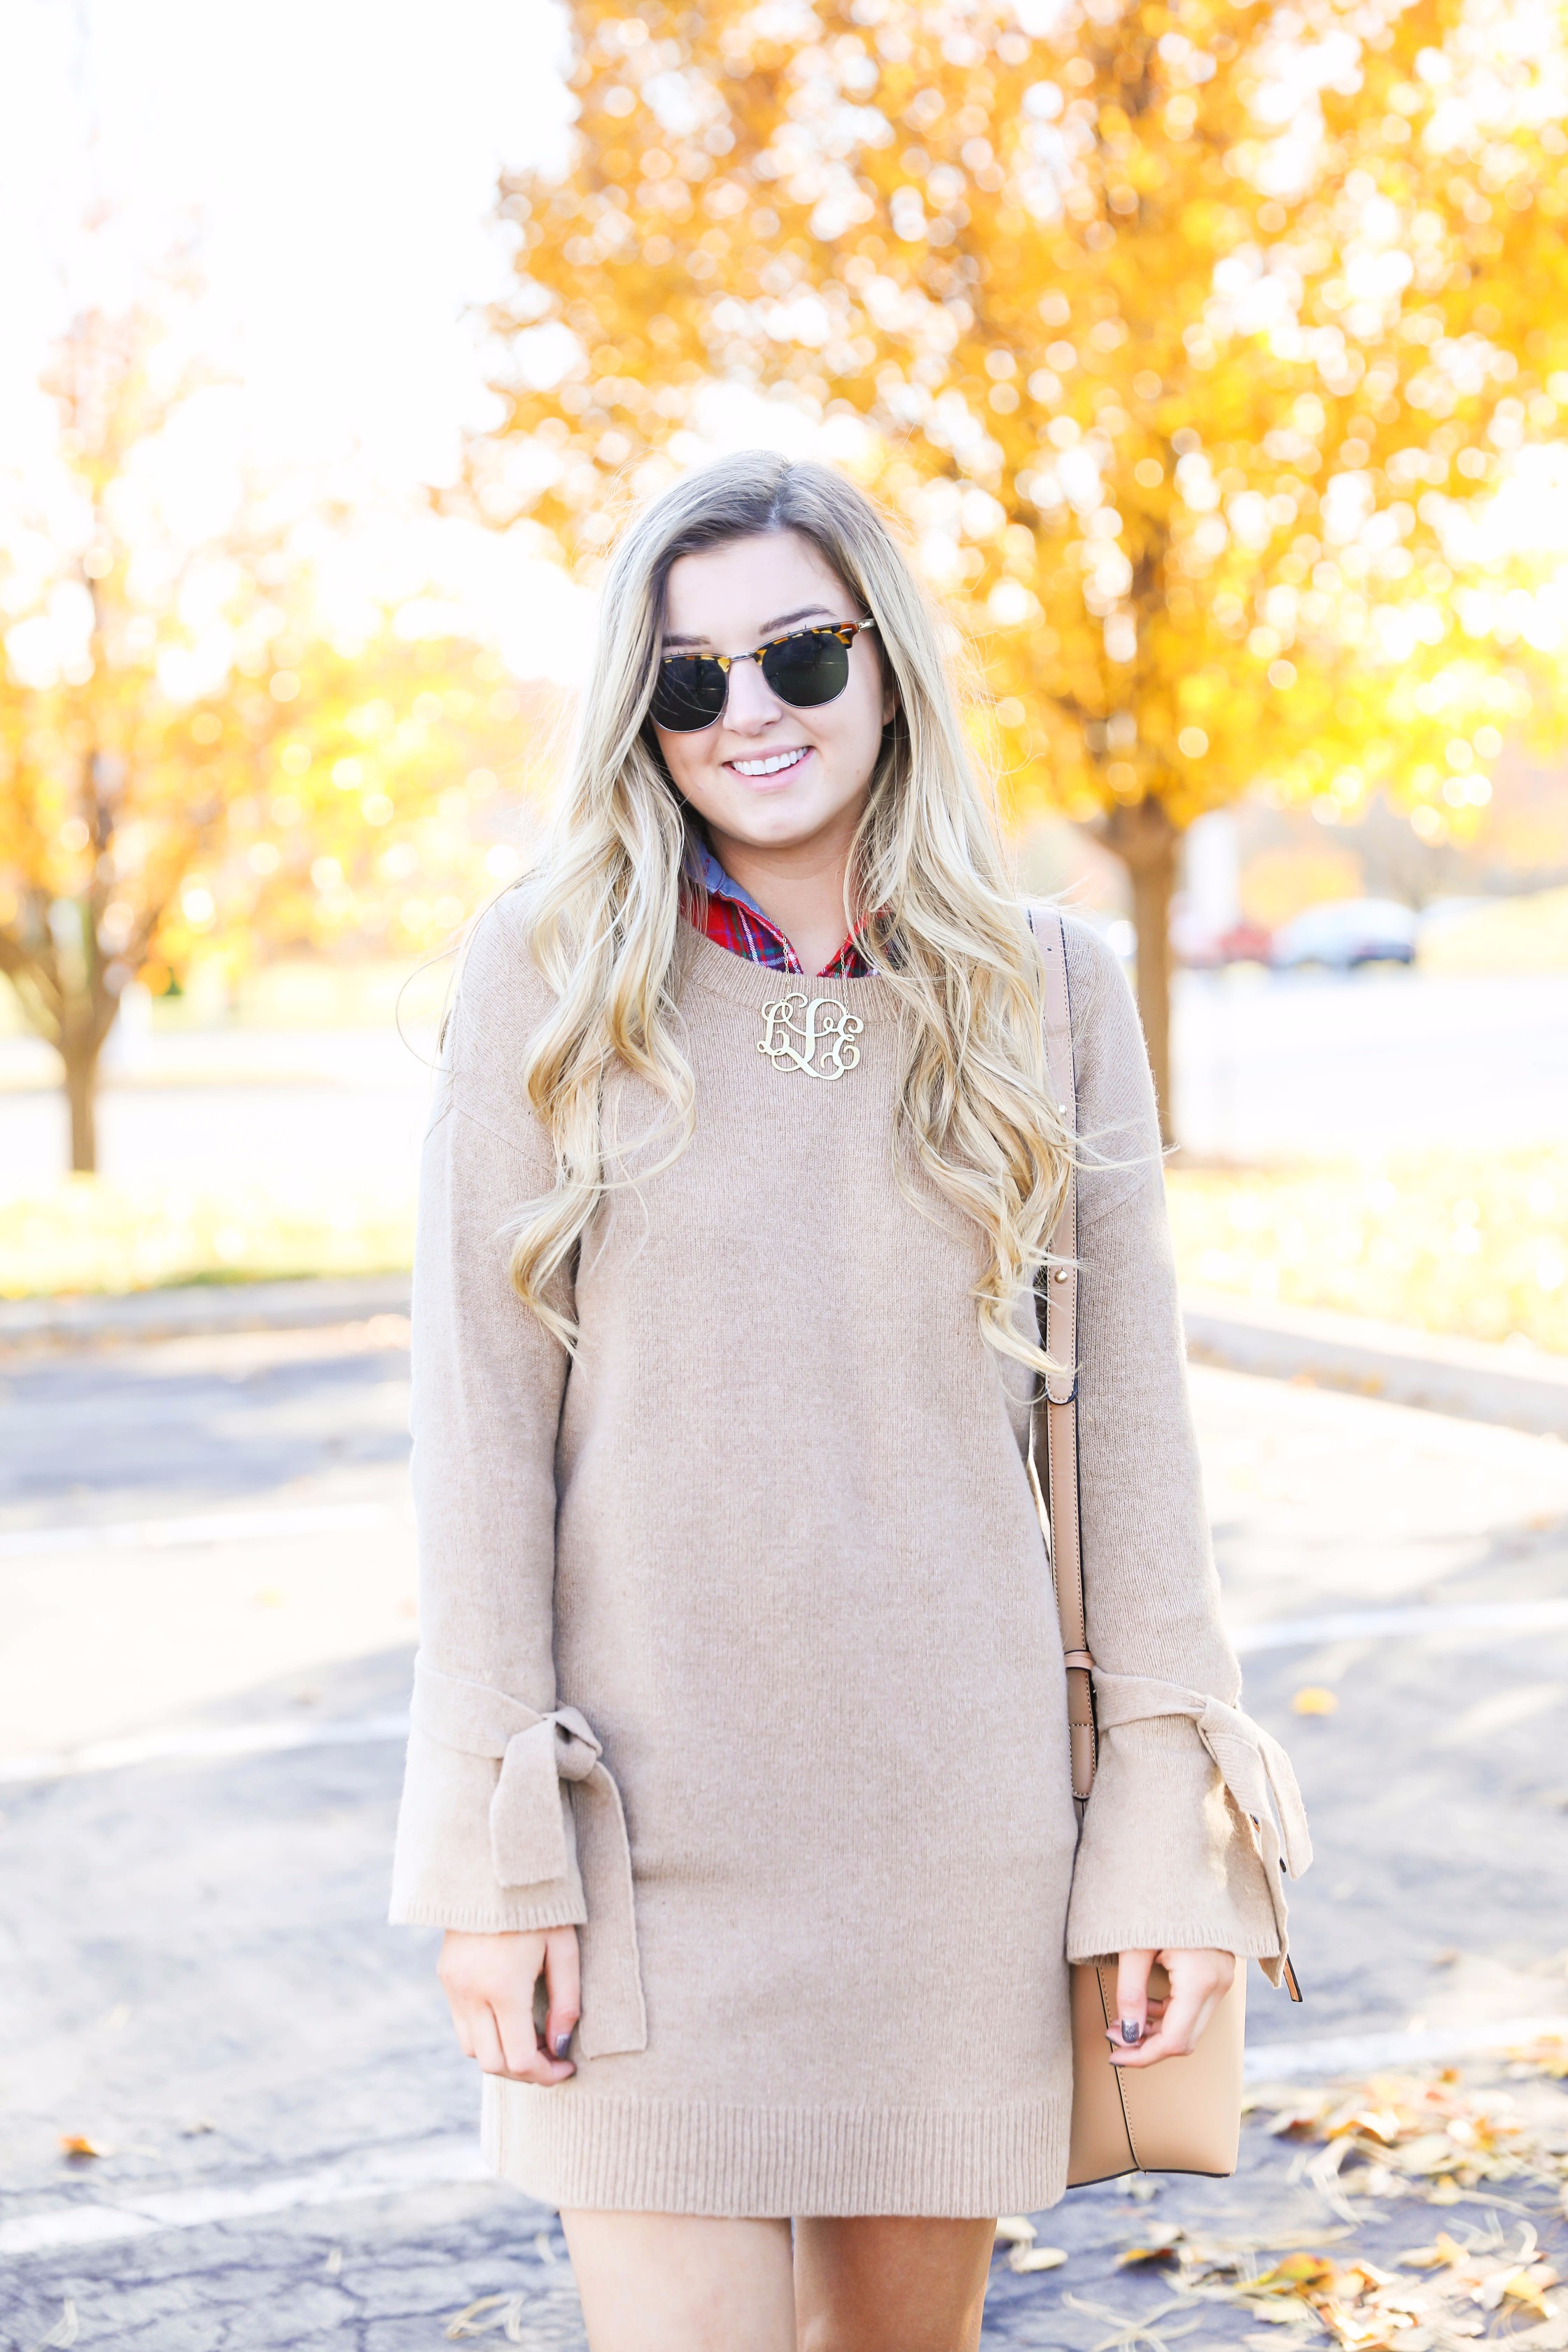 Thanksgiving outfit idea tan dress with tied sleeves! Layered with flannel underneath! I love this fall outfit with hunter boots! Details on fashion blog daily dose of charm by lauren lindmark